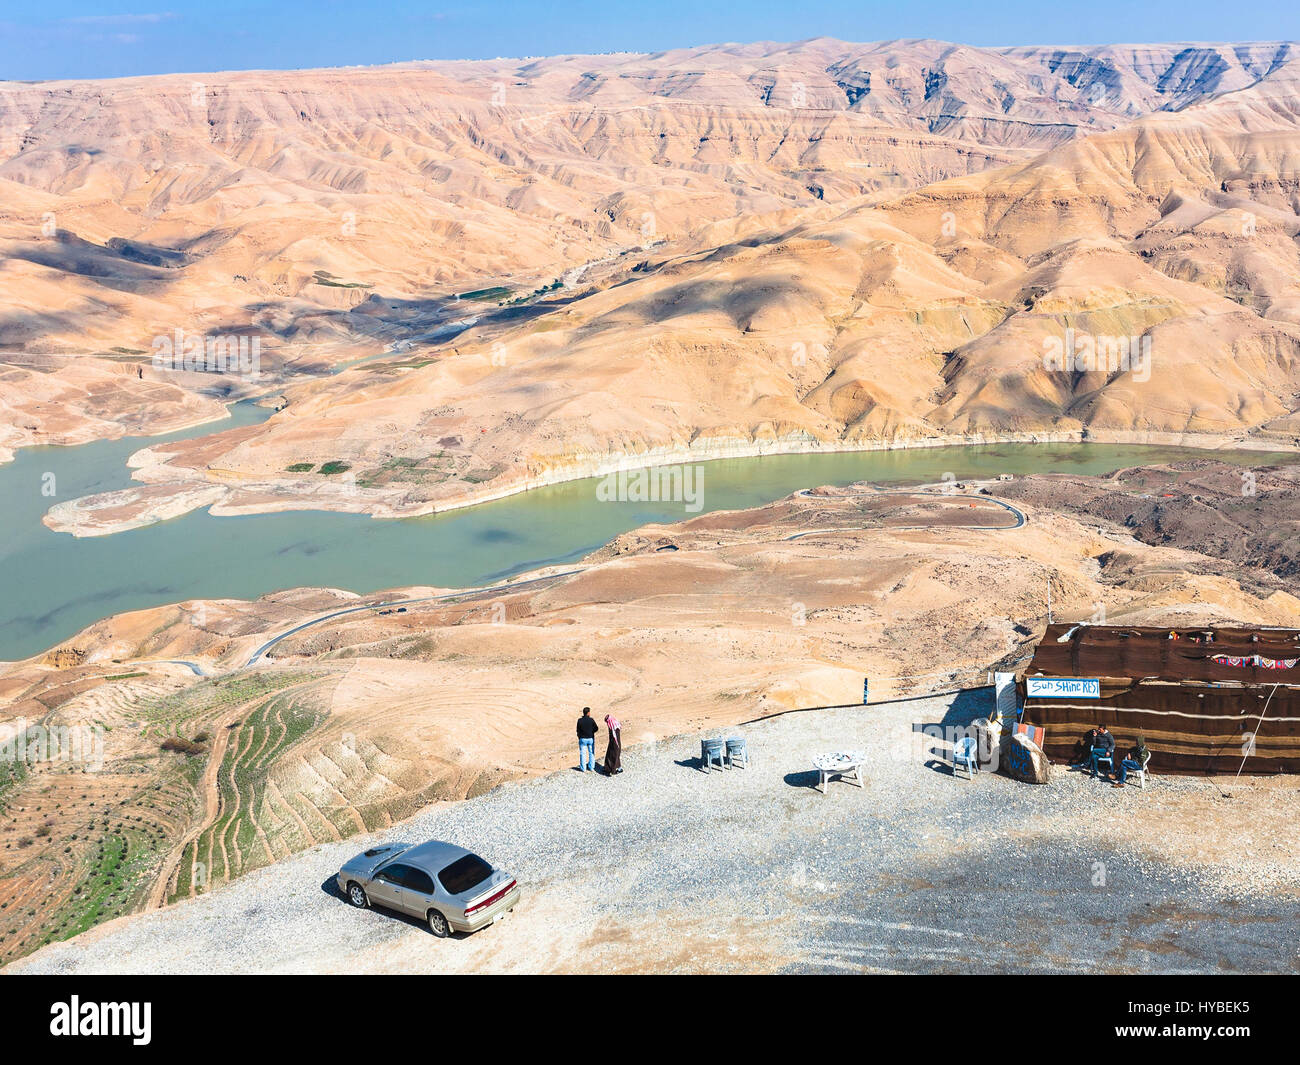 DHIBAN, JORDAN - FEBRUARY 20, 2012: tourists at viewpoint over Al Mujib dam  on Wadi Mujib river on King's highway in winter. King's Road was trade rou  Stock Photo - Alamy